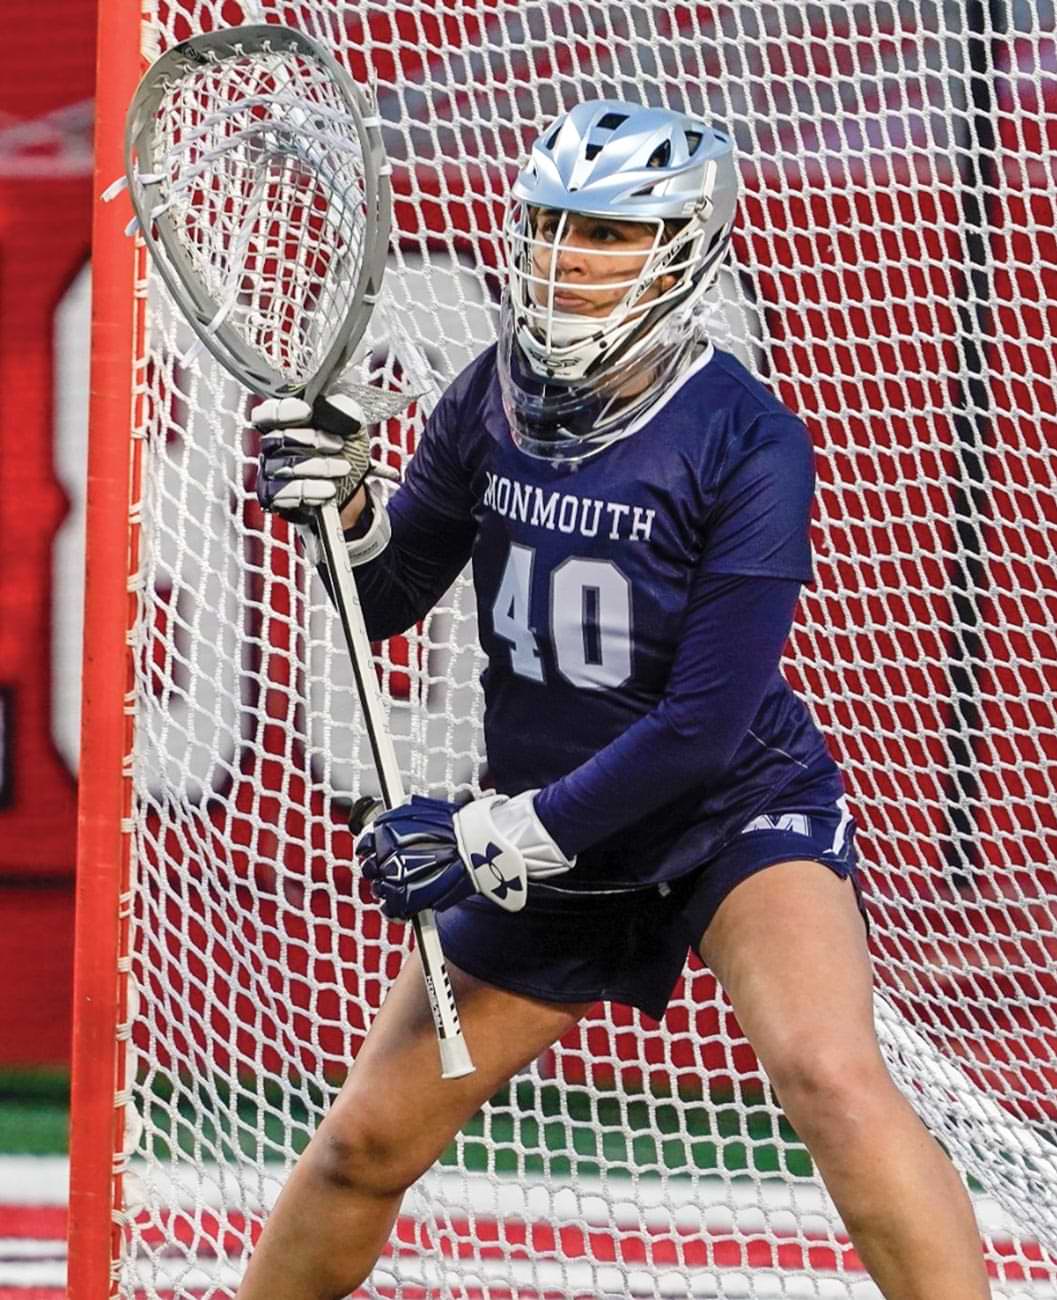 Monmouth Womens's Lacrosse player wears a mask and gloves while holding a goalie crosse and standing at the ready in the crease